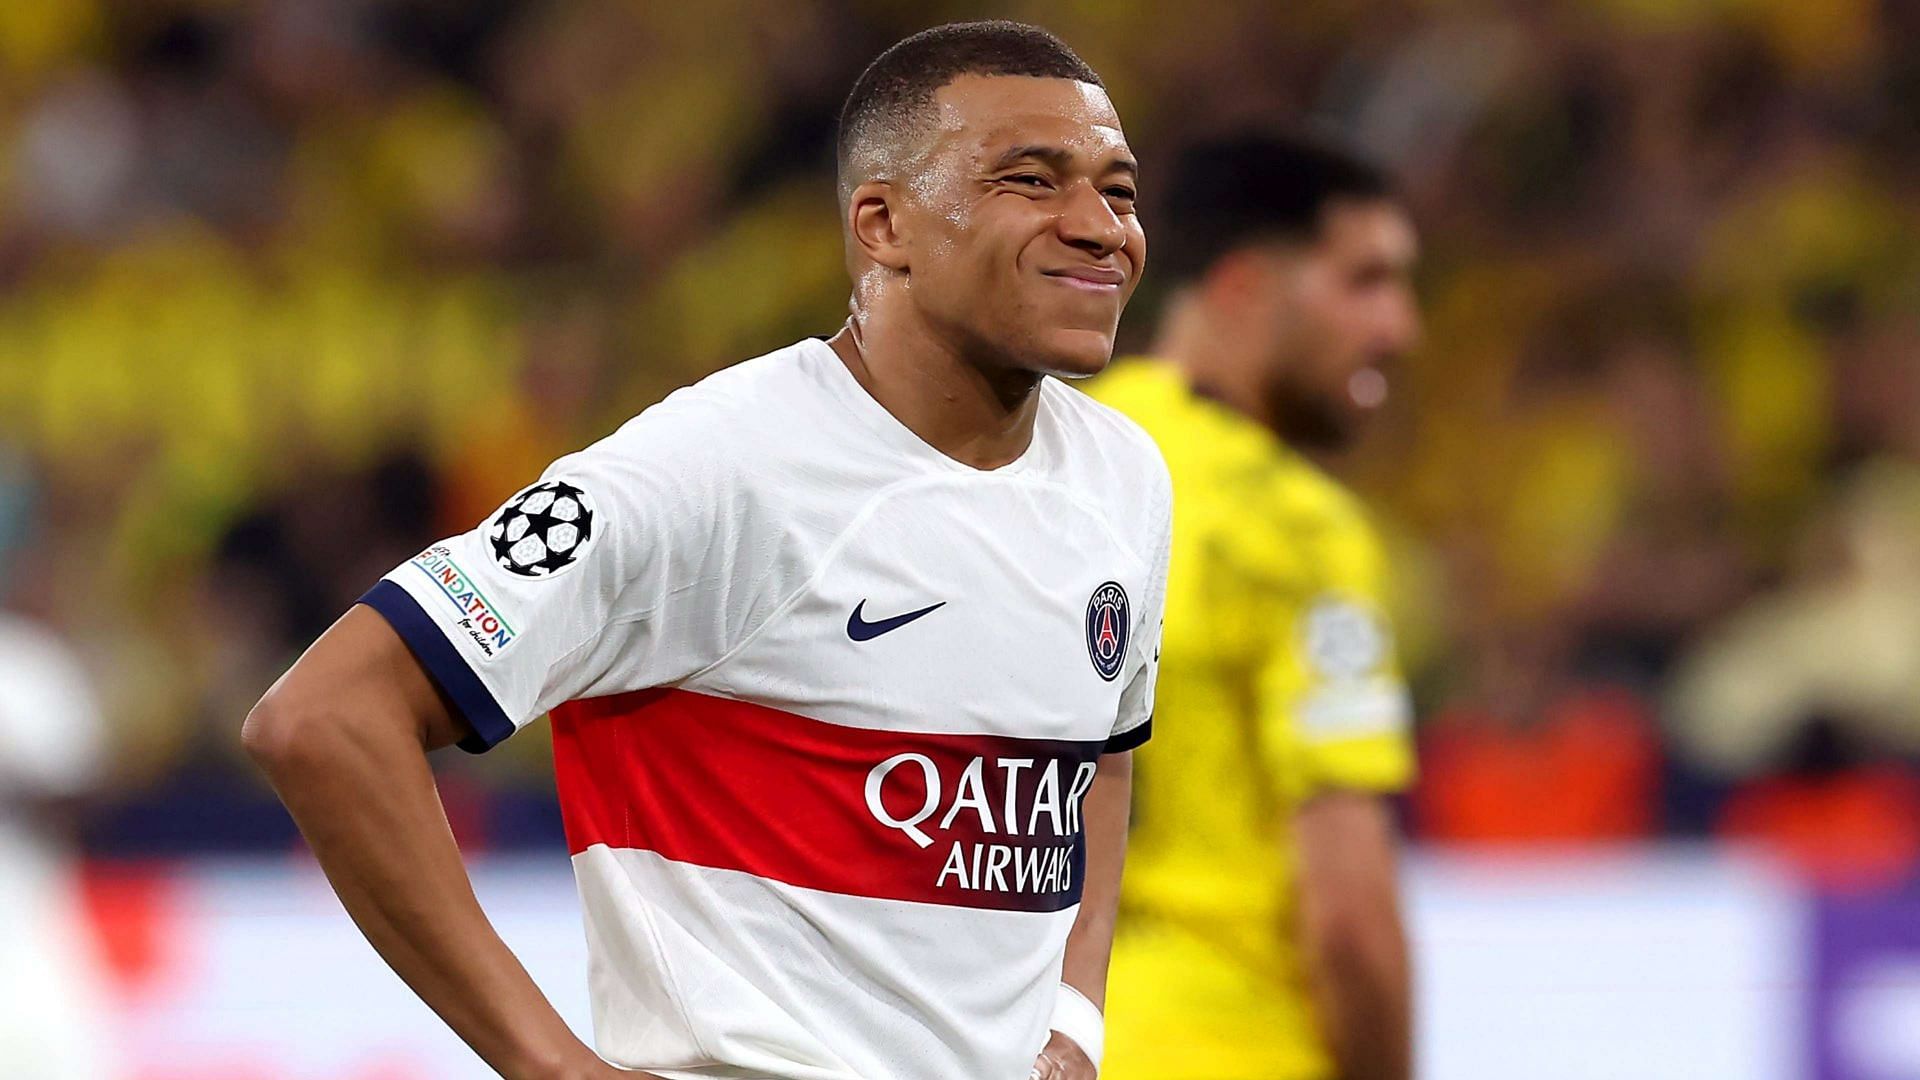 Mbappe joined PSG in 2017 from AS Monaco